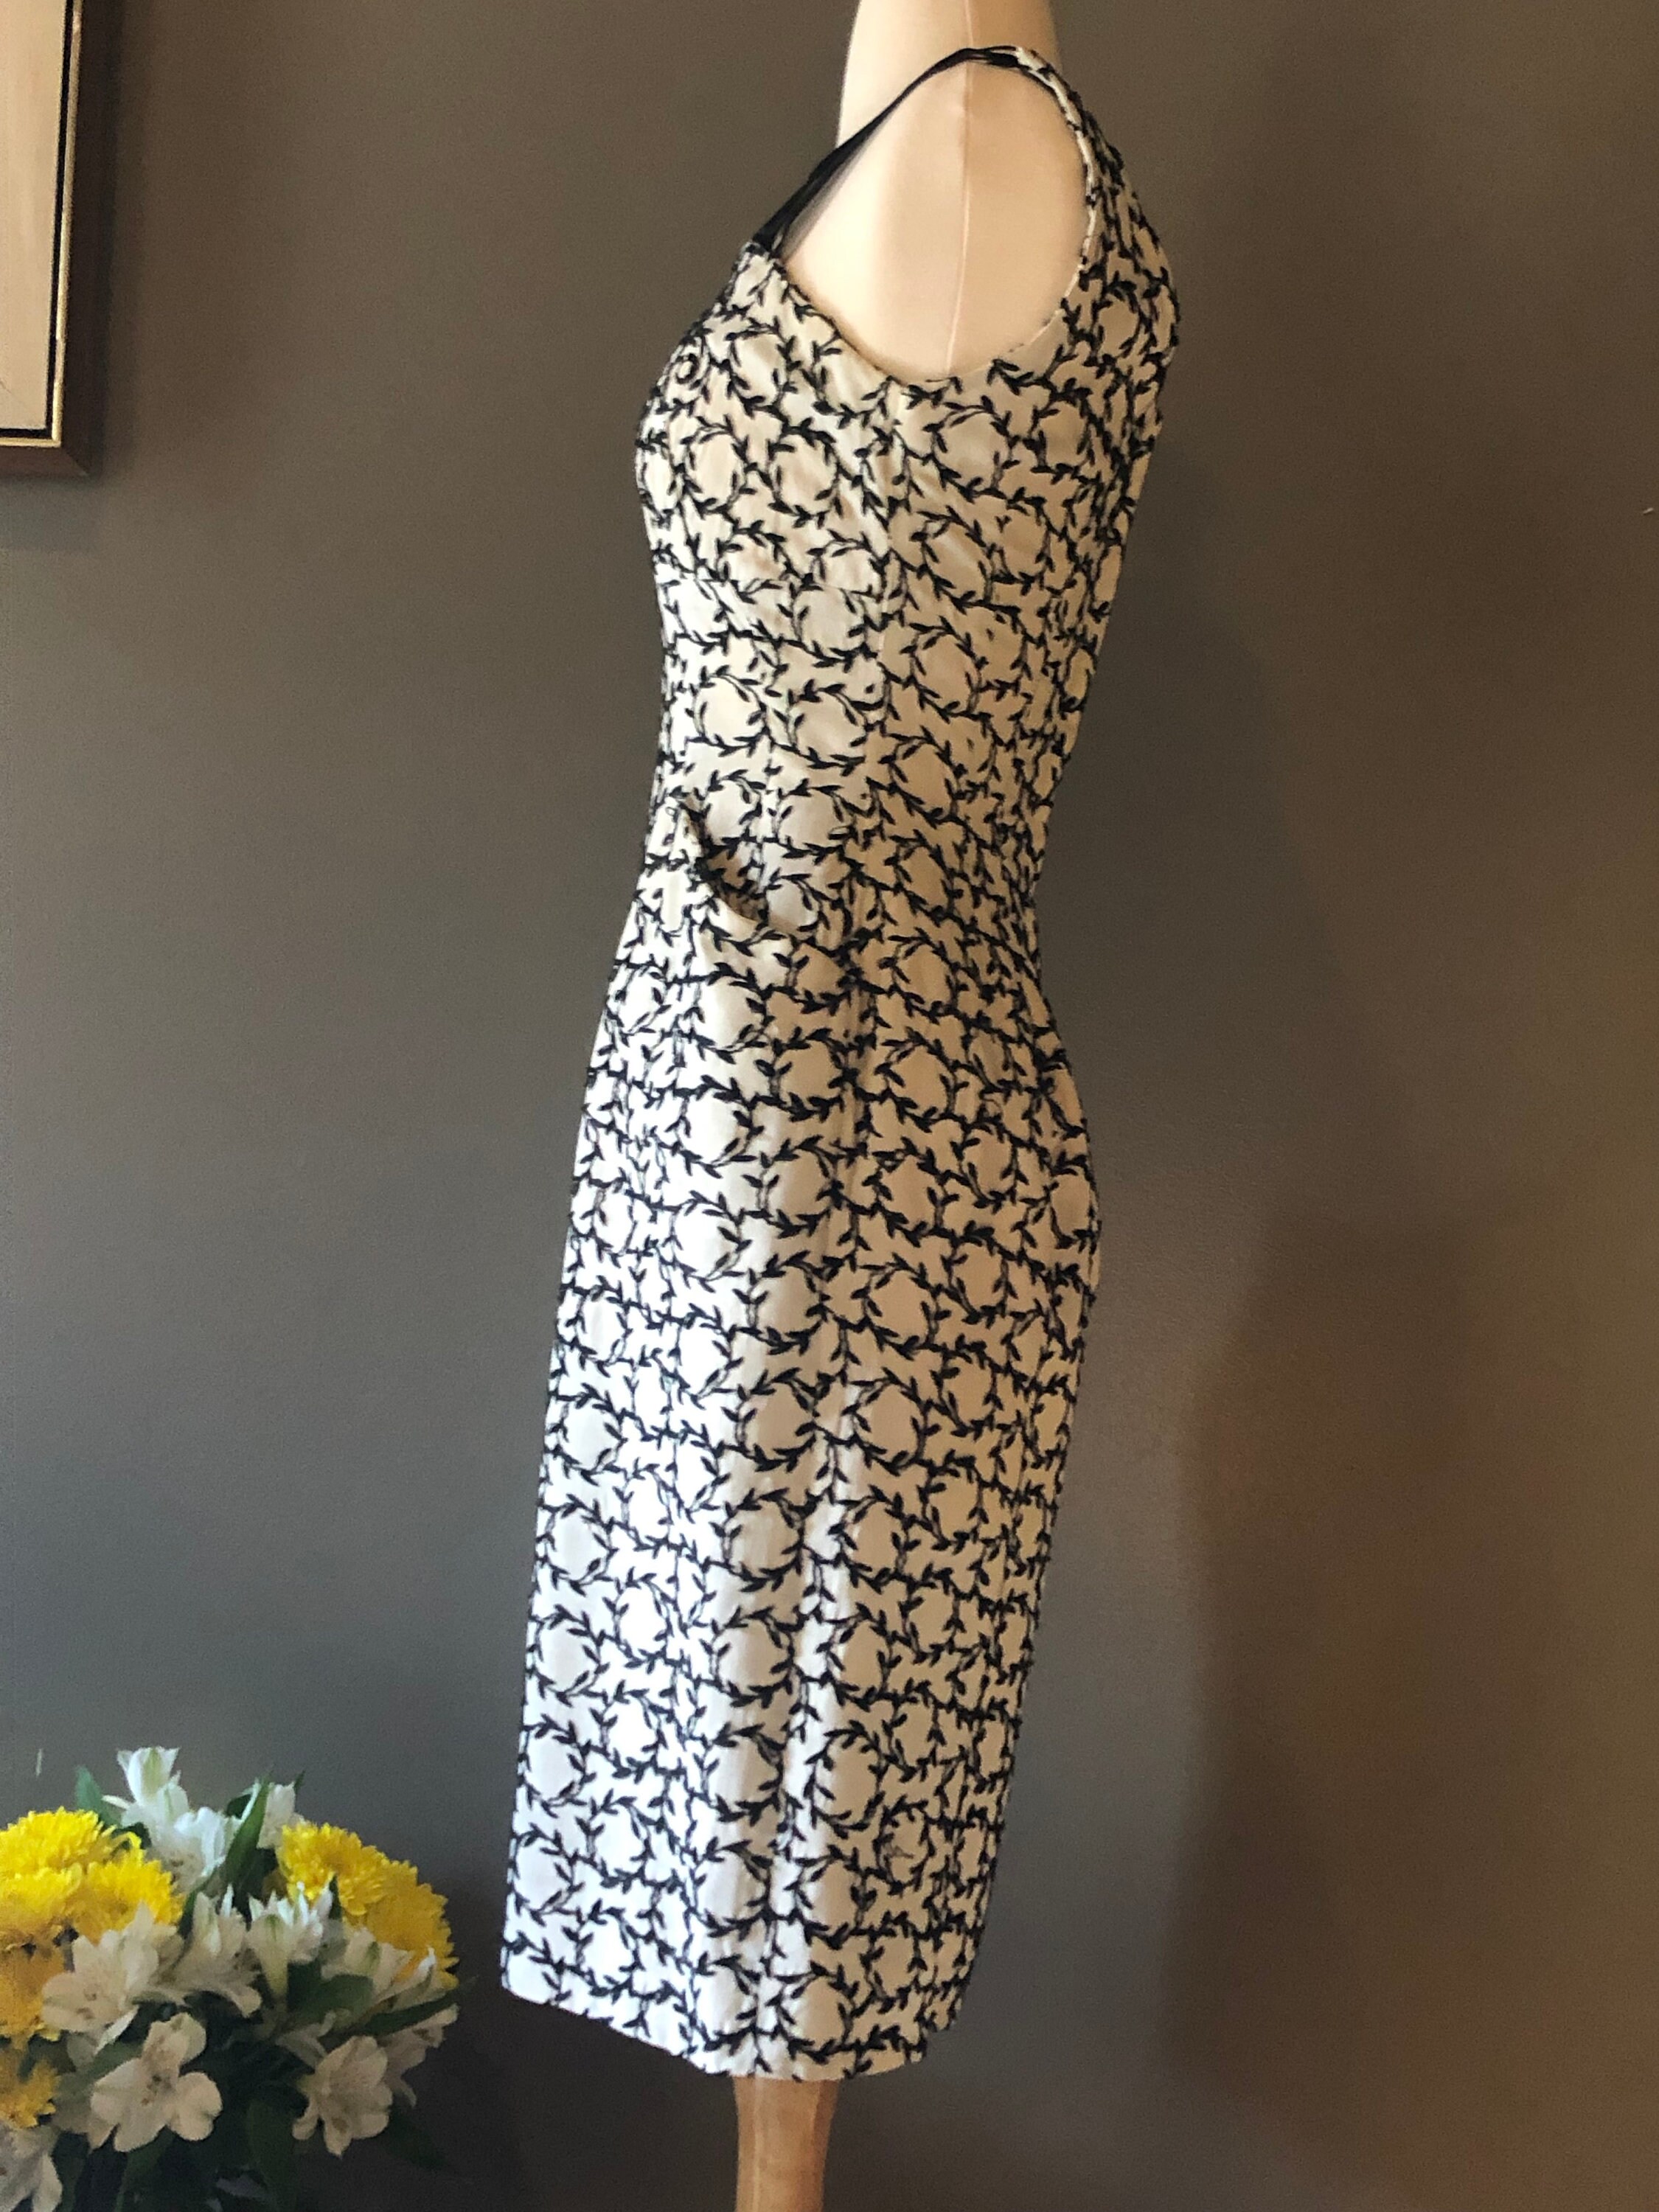 Stunning 1950's Wiggle Dress with Pockets XS | Etsy